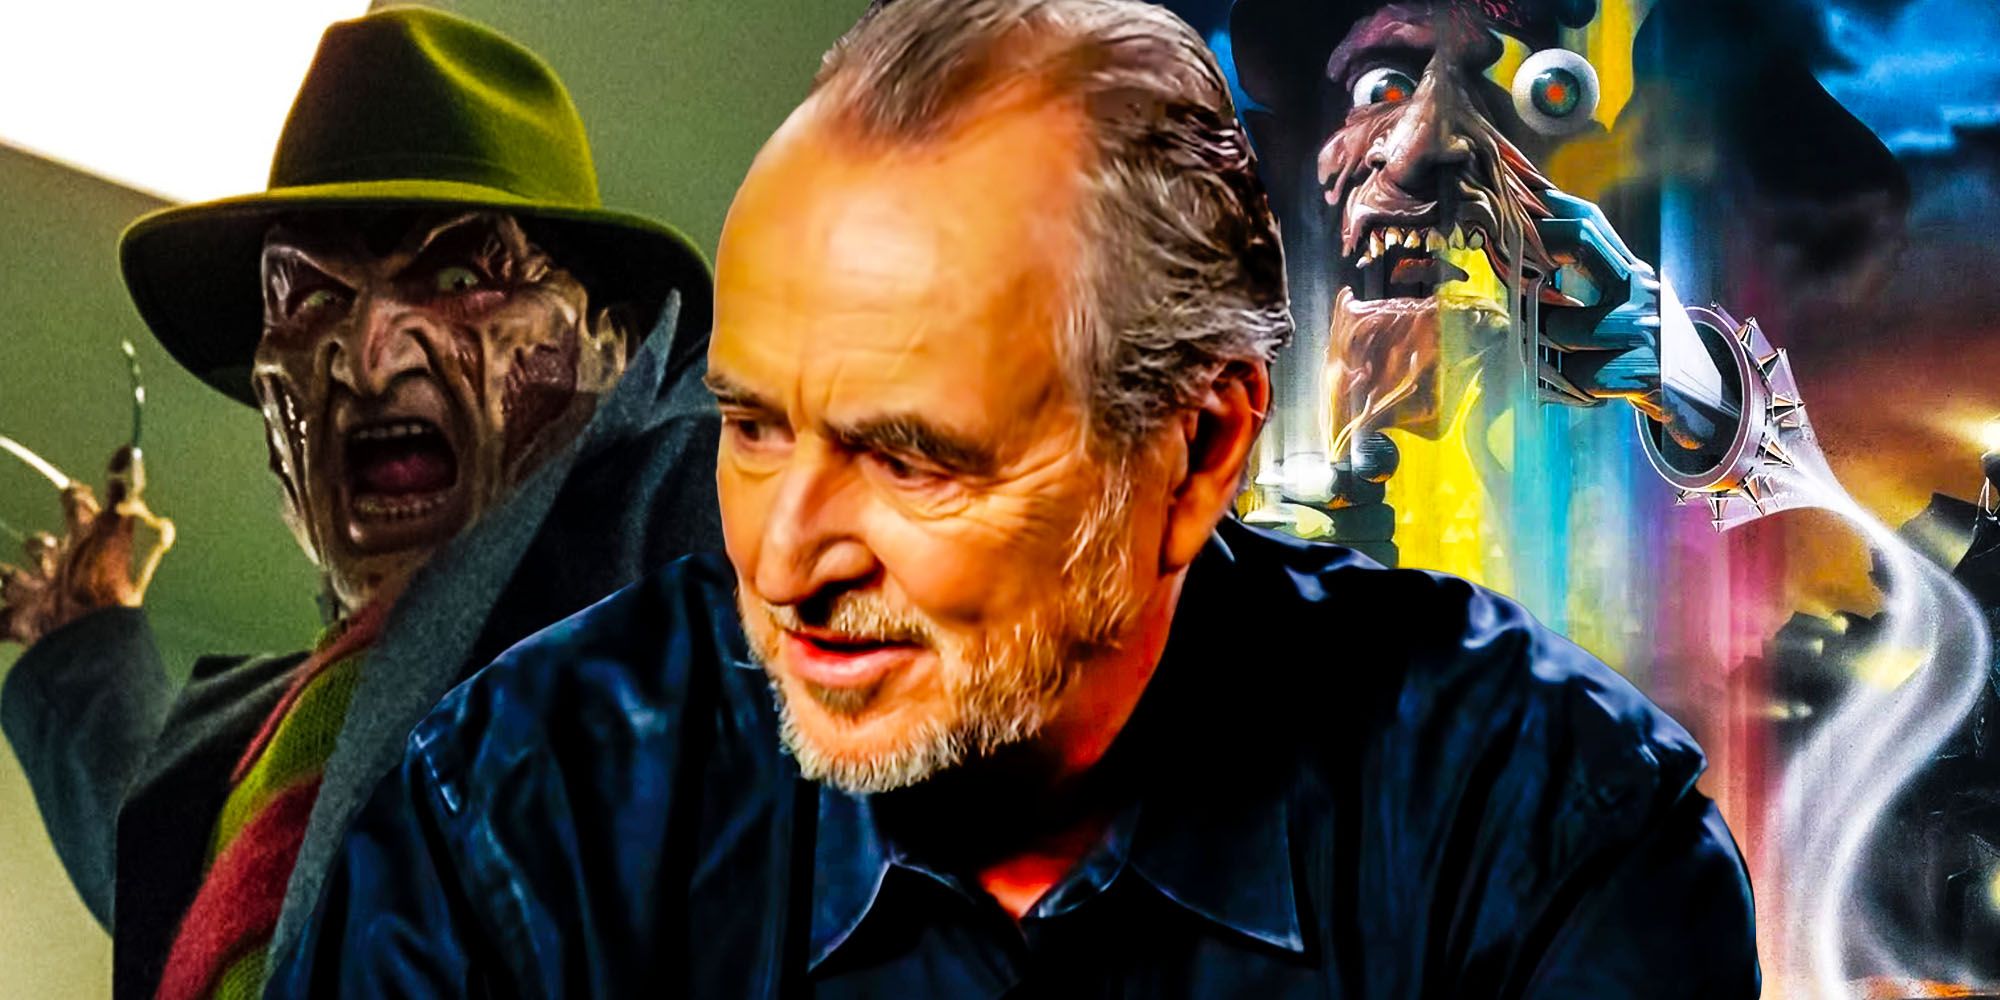 Wes Craven cancelled nightmare on elm street sequels